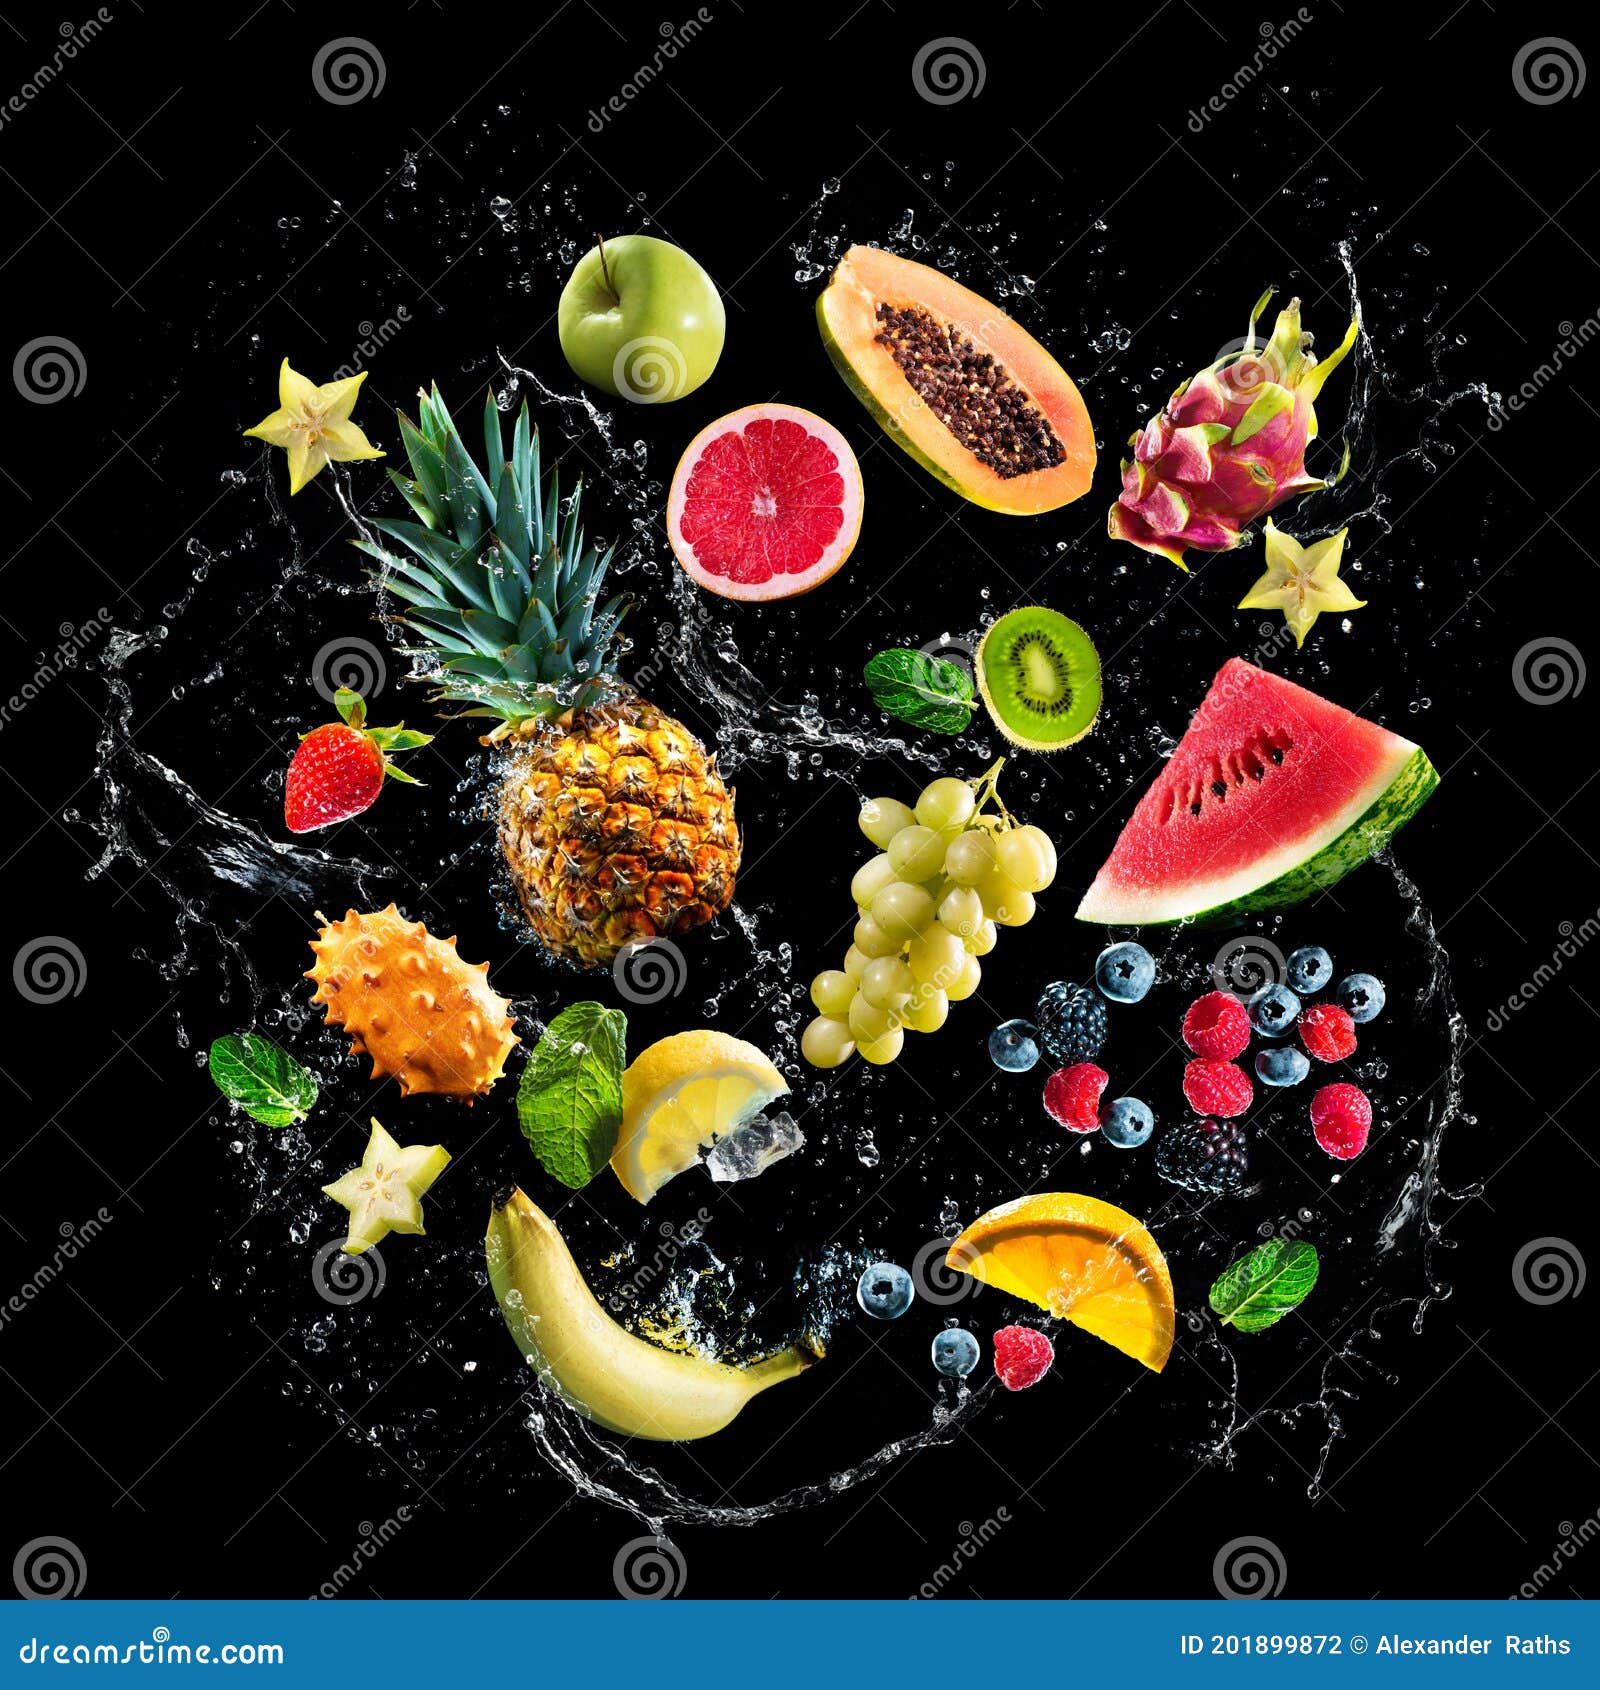 793,108 Background Fruits Stock Photos - Free & Royalty-Free Stock Photos  from Dreamstime